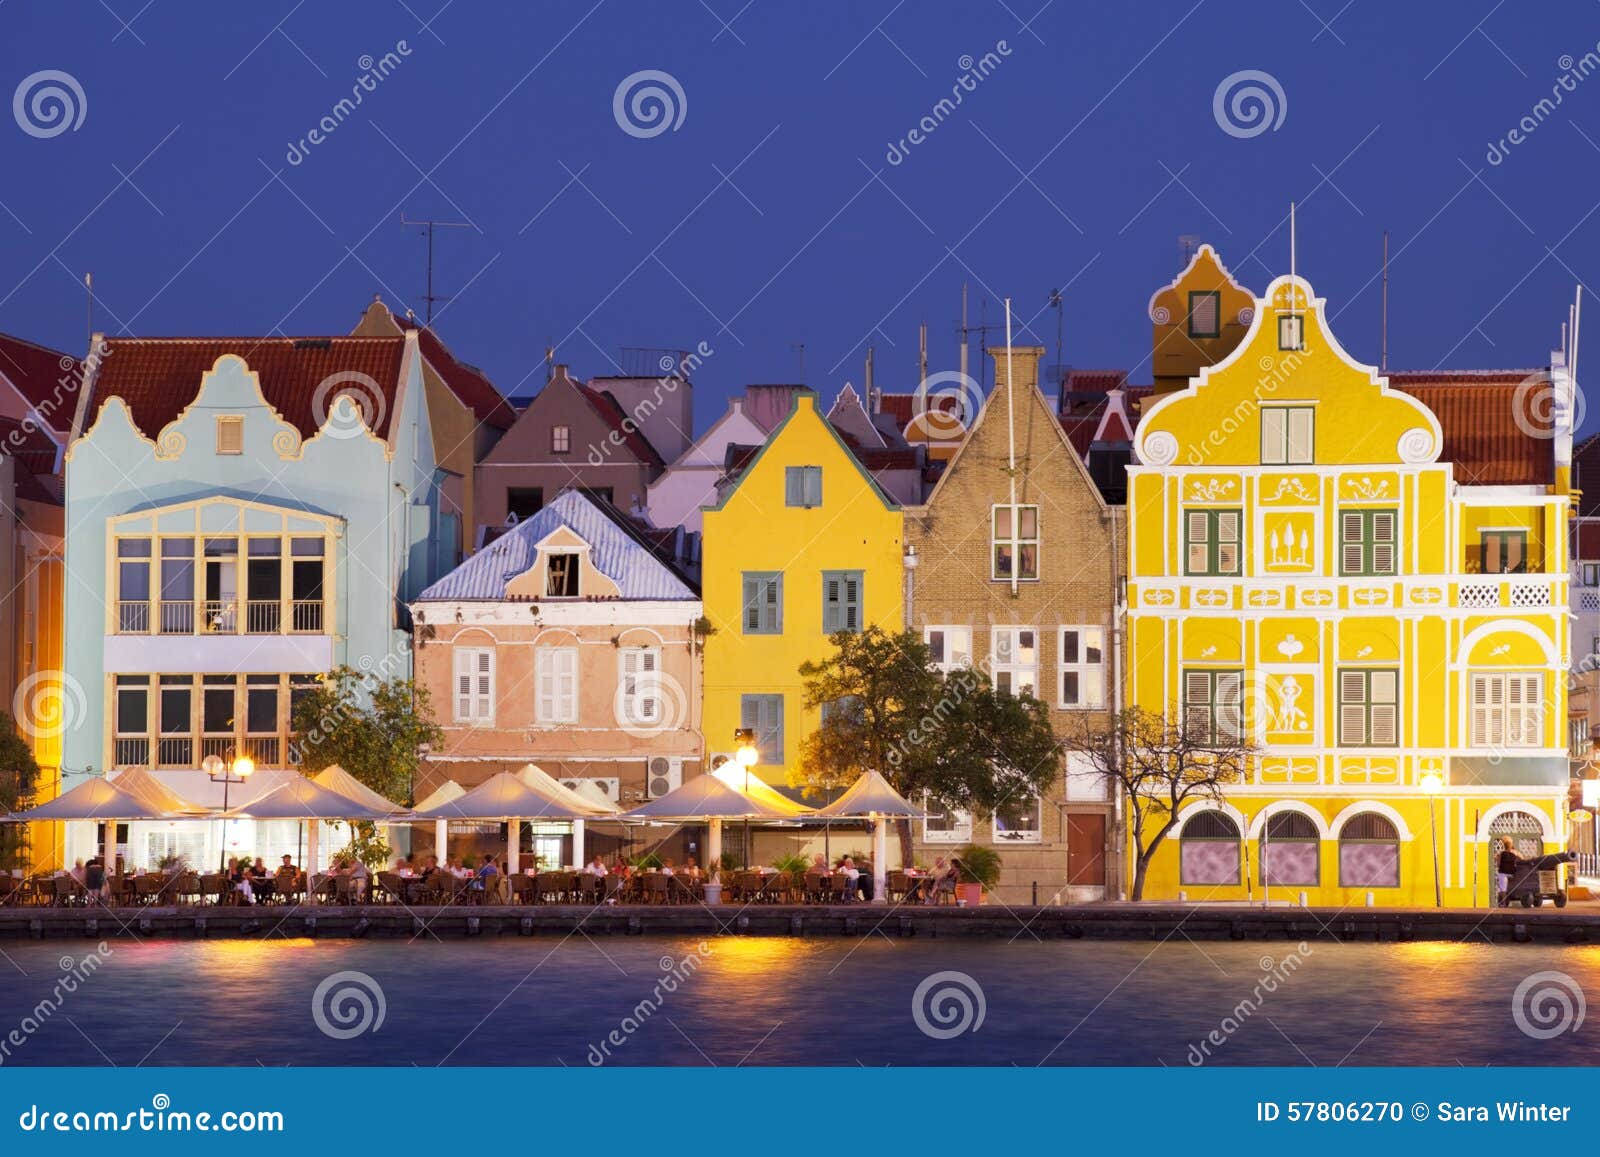 colorful houses of willemstad, curaÃÂ§ao at night